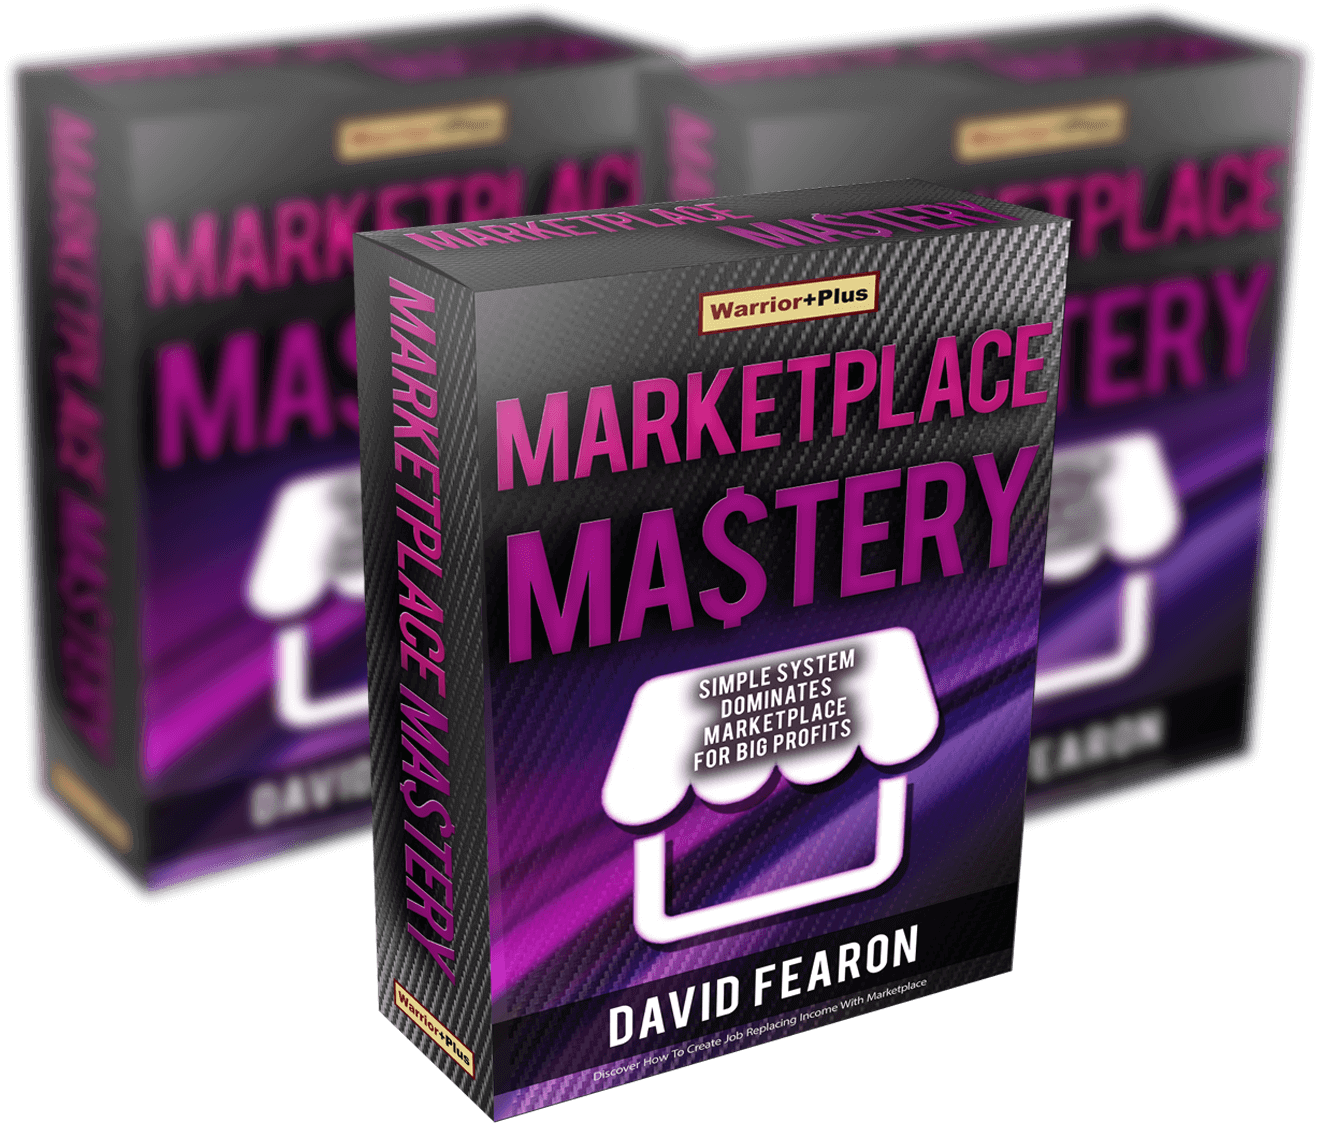 Marketplace-Mastery-Review